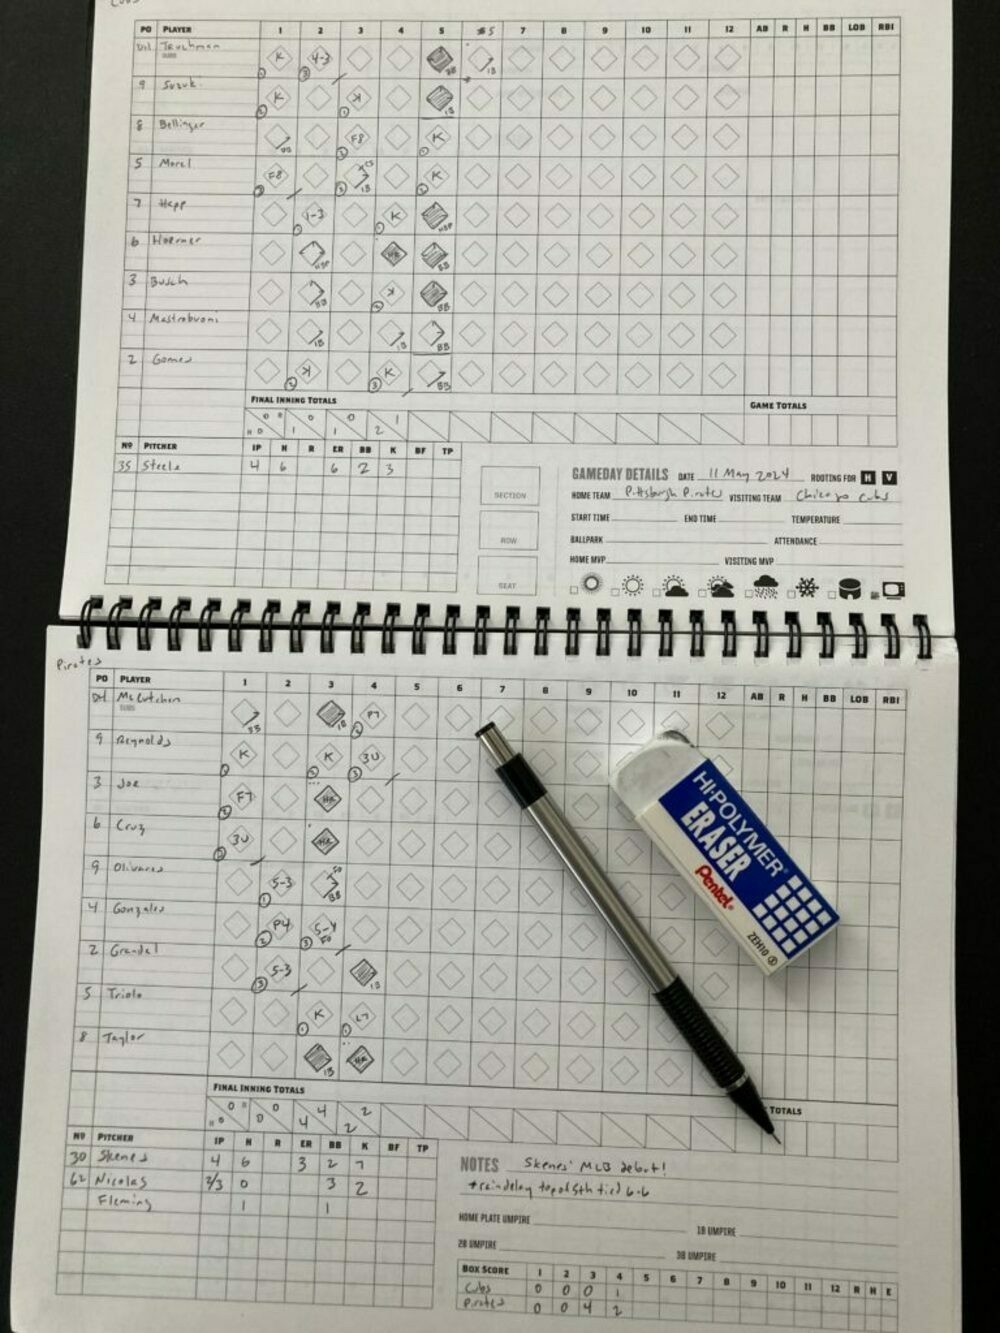 open baseball scorebook recording the first 4 2/3 innings of today's Pirates vs Cubs game. there's a mechanical pencil and eraser sitting on top